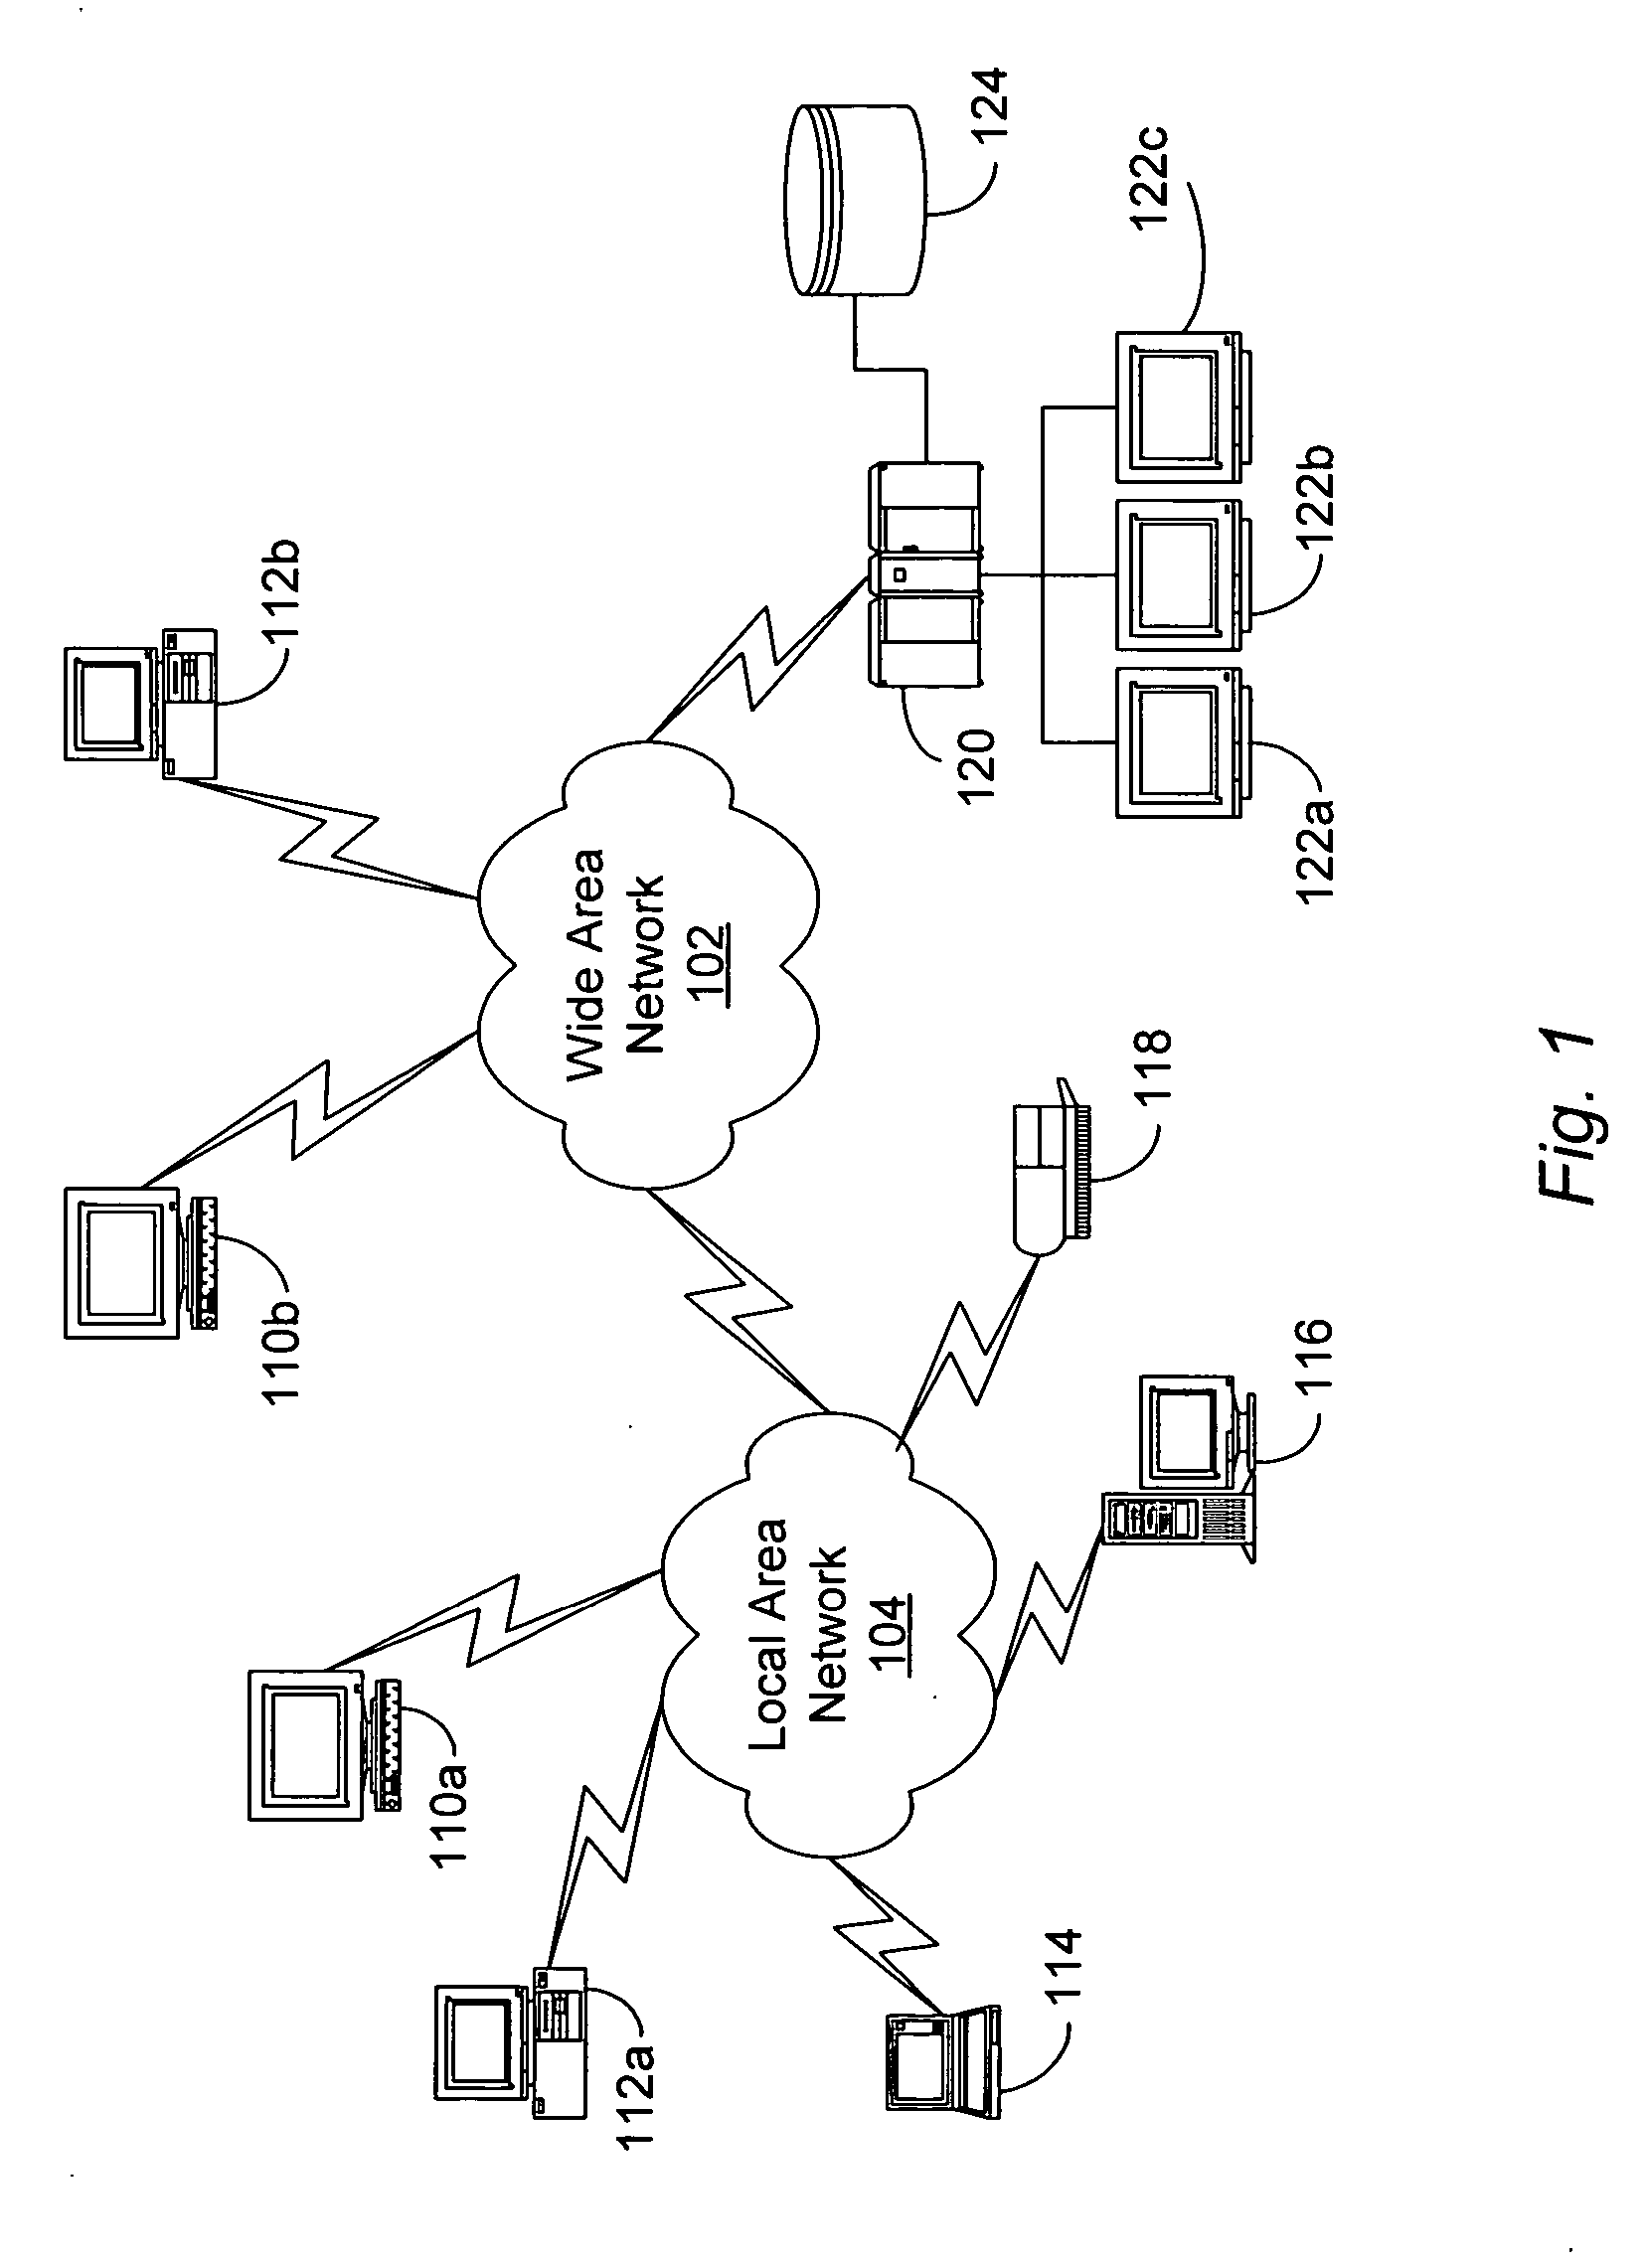 Systems and methods for handwriting analysis in documents